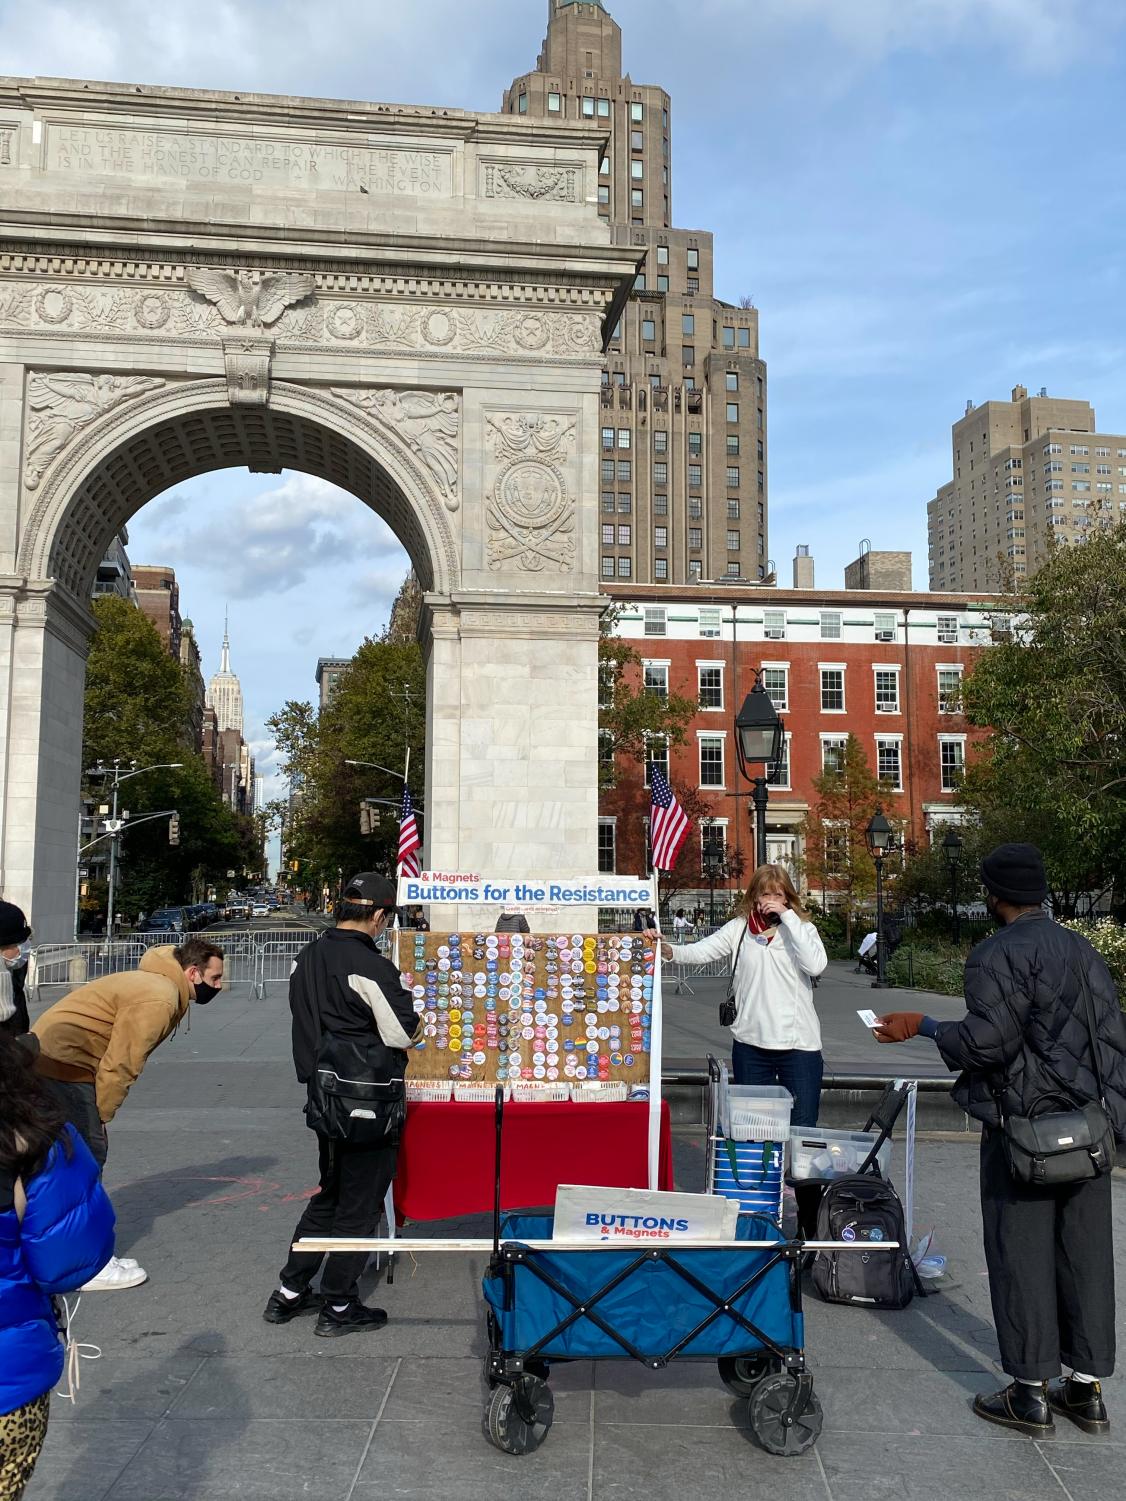 A button vendor in Washington Square Park with the Arch behind her